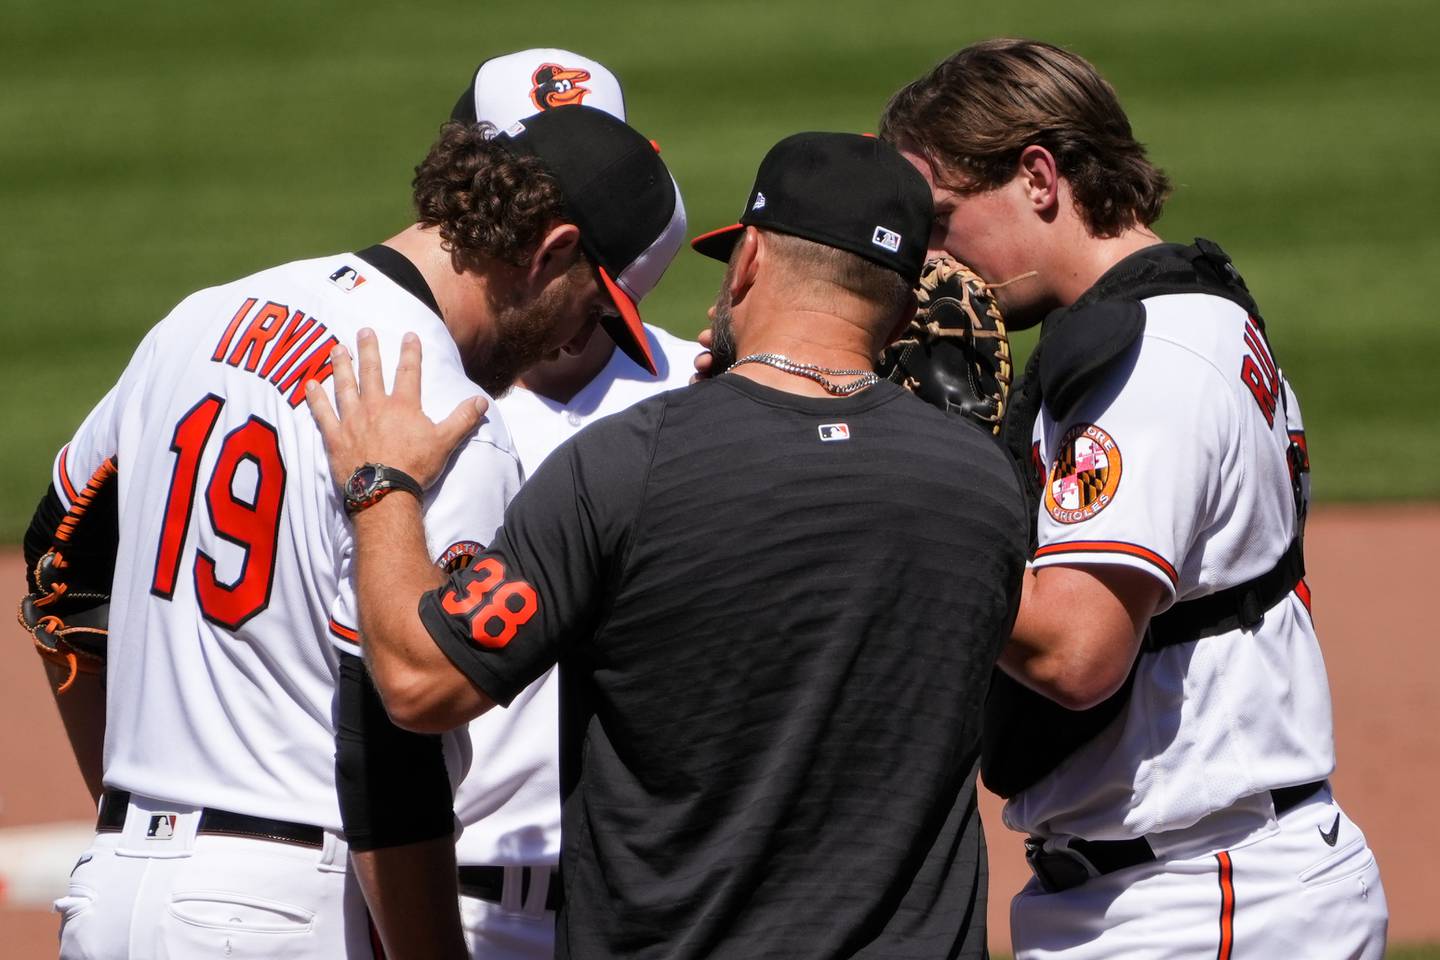 Baltimore Orioles starting pitcher Cole Irvin (19) checks in with teammates and pitching coach Chris Holt (38) during a timeout in a baseball game against the Oakland Athletics at Camden Yards on Wednesday, April 12. This was the fourth game in a series the Orioles played against the Athletics.